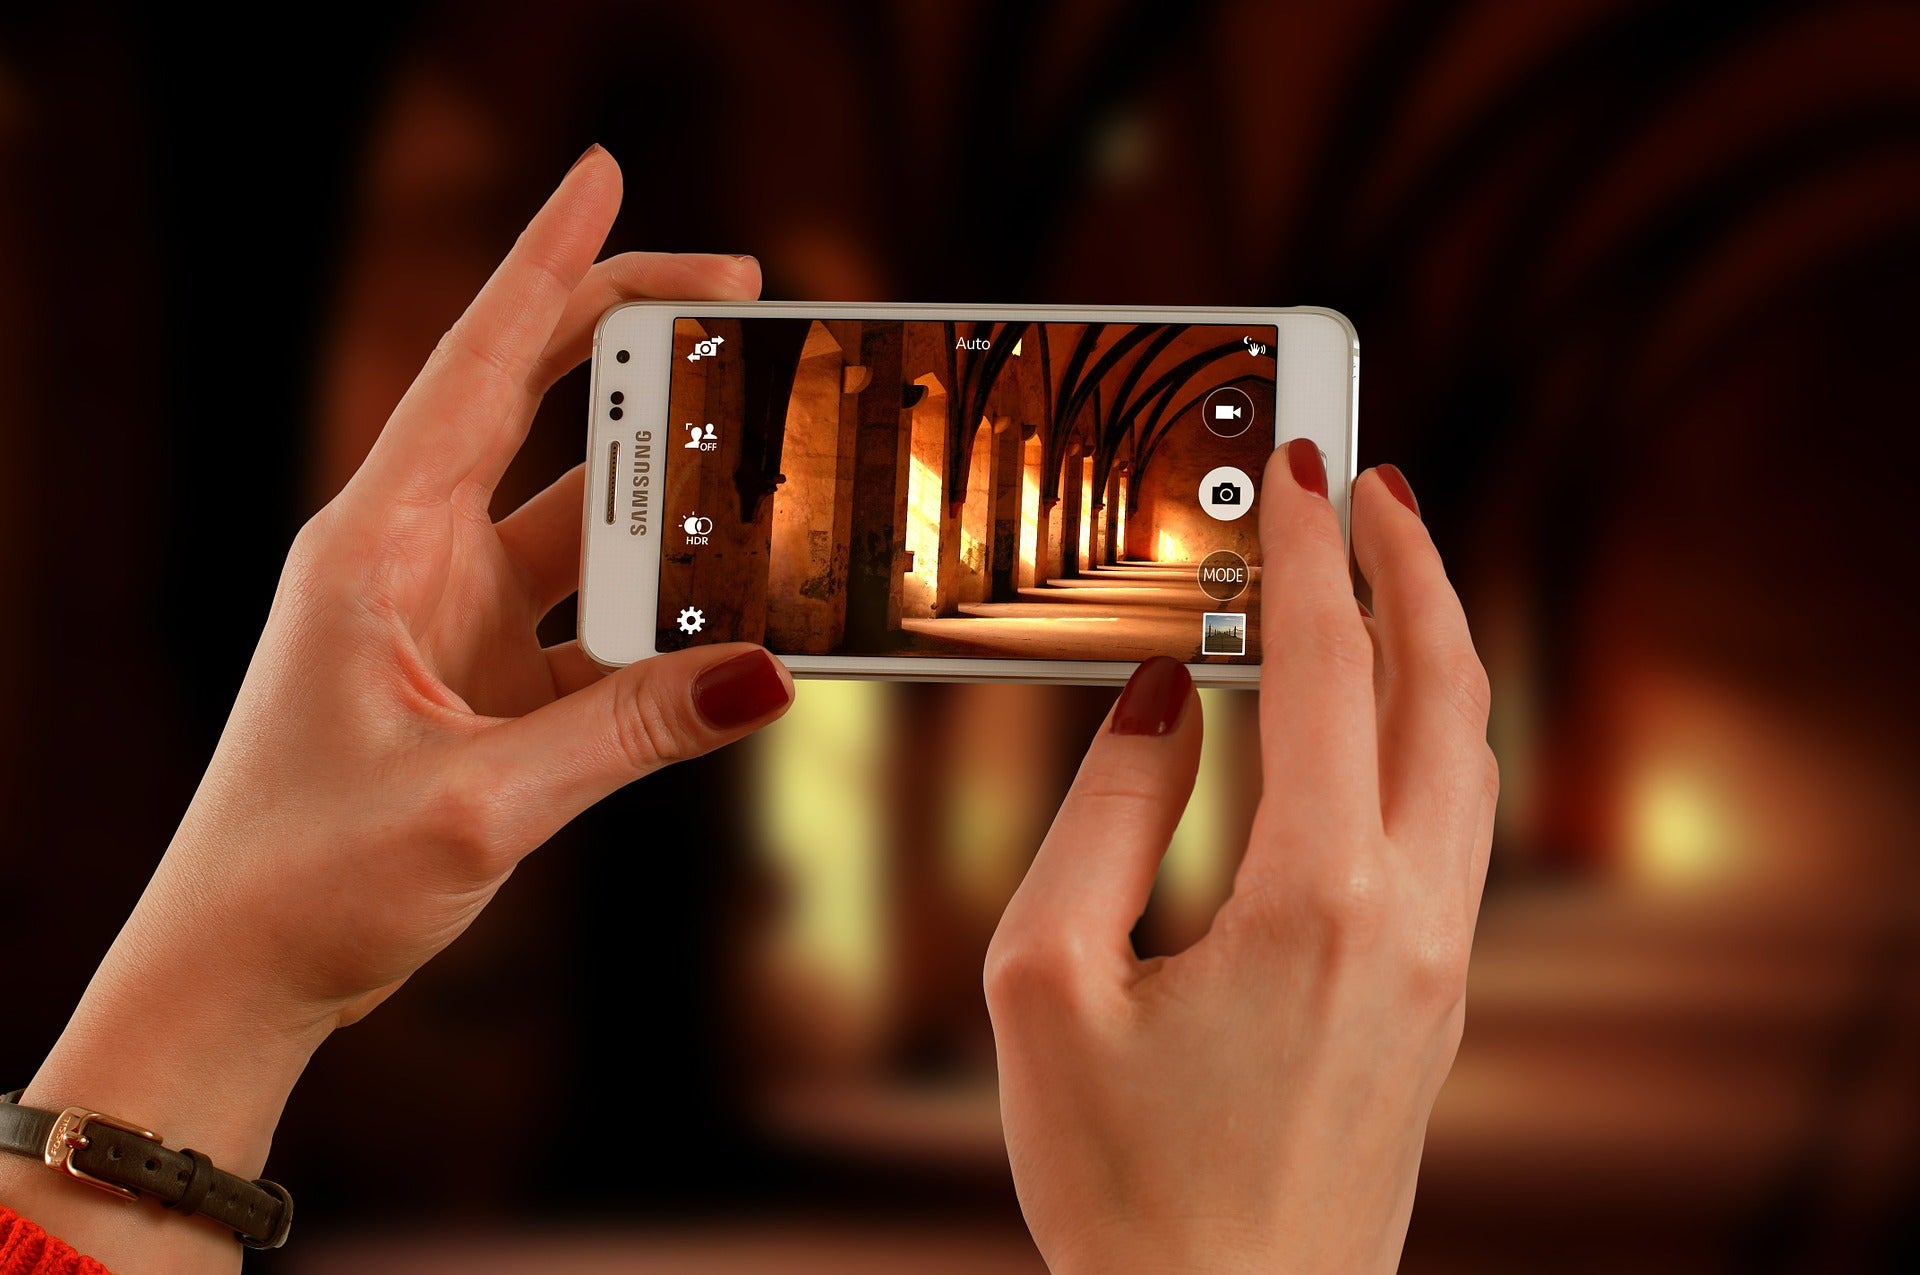 From Shazam to selfie security: 5 ingenious ways to use the smartphone camera